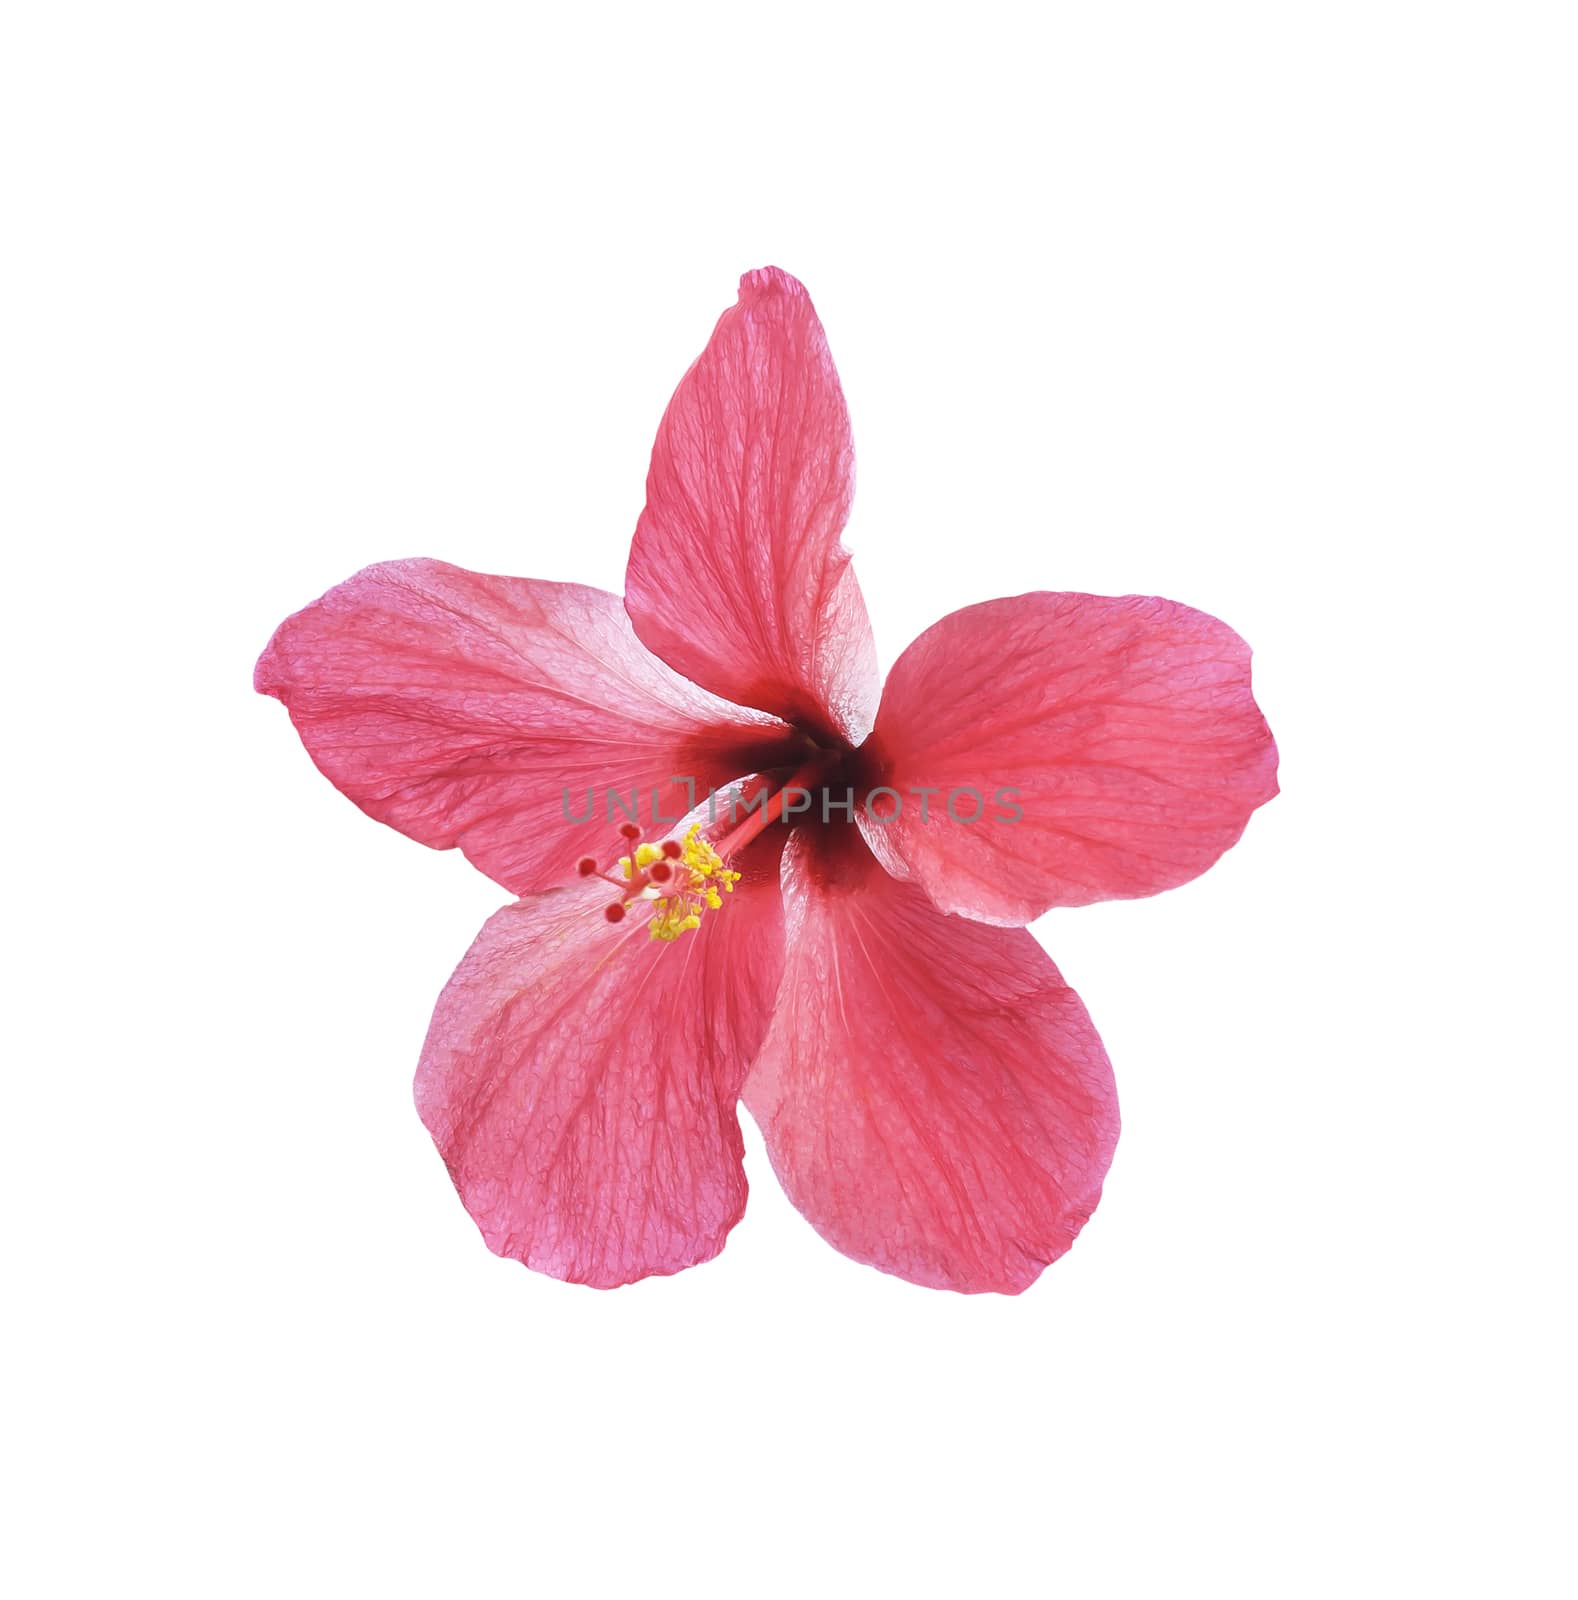 Hibiscus flower isolated on white background with clipping path